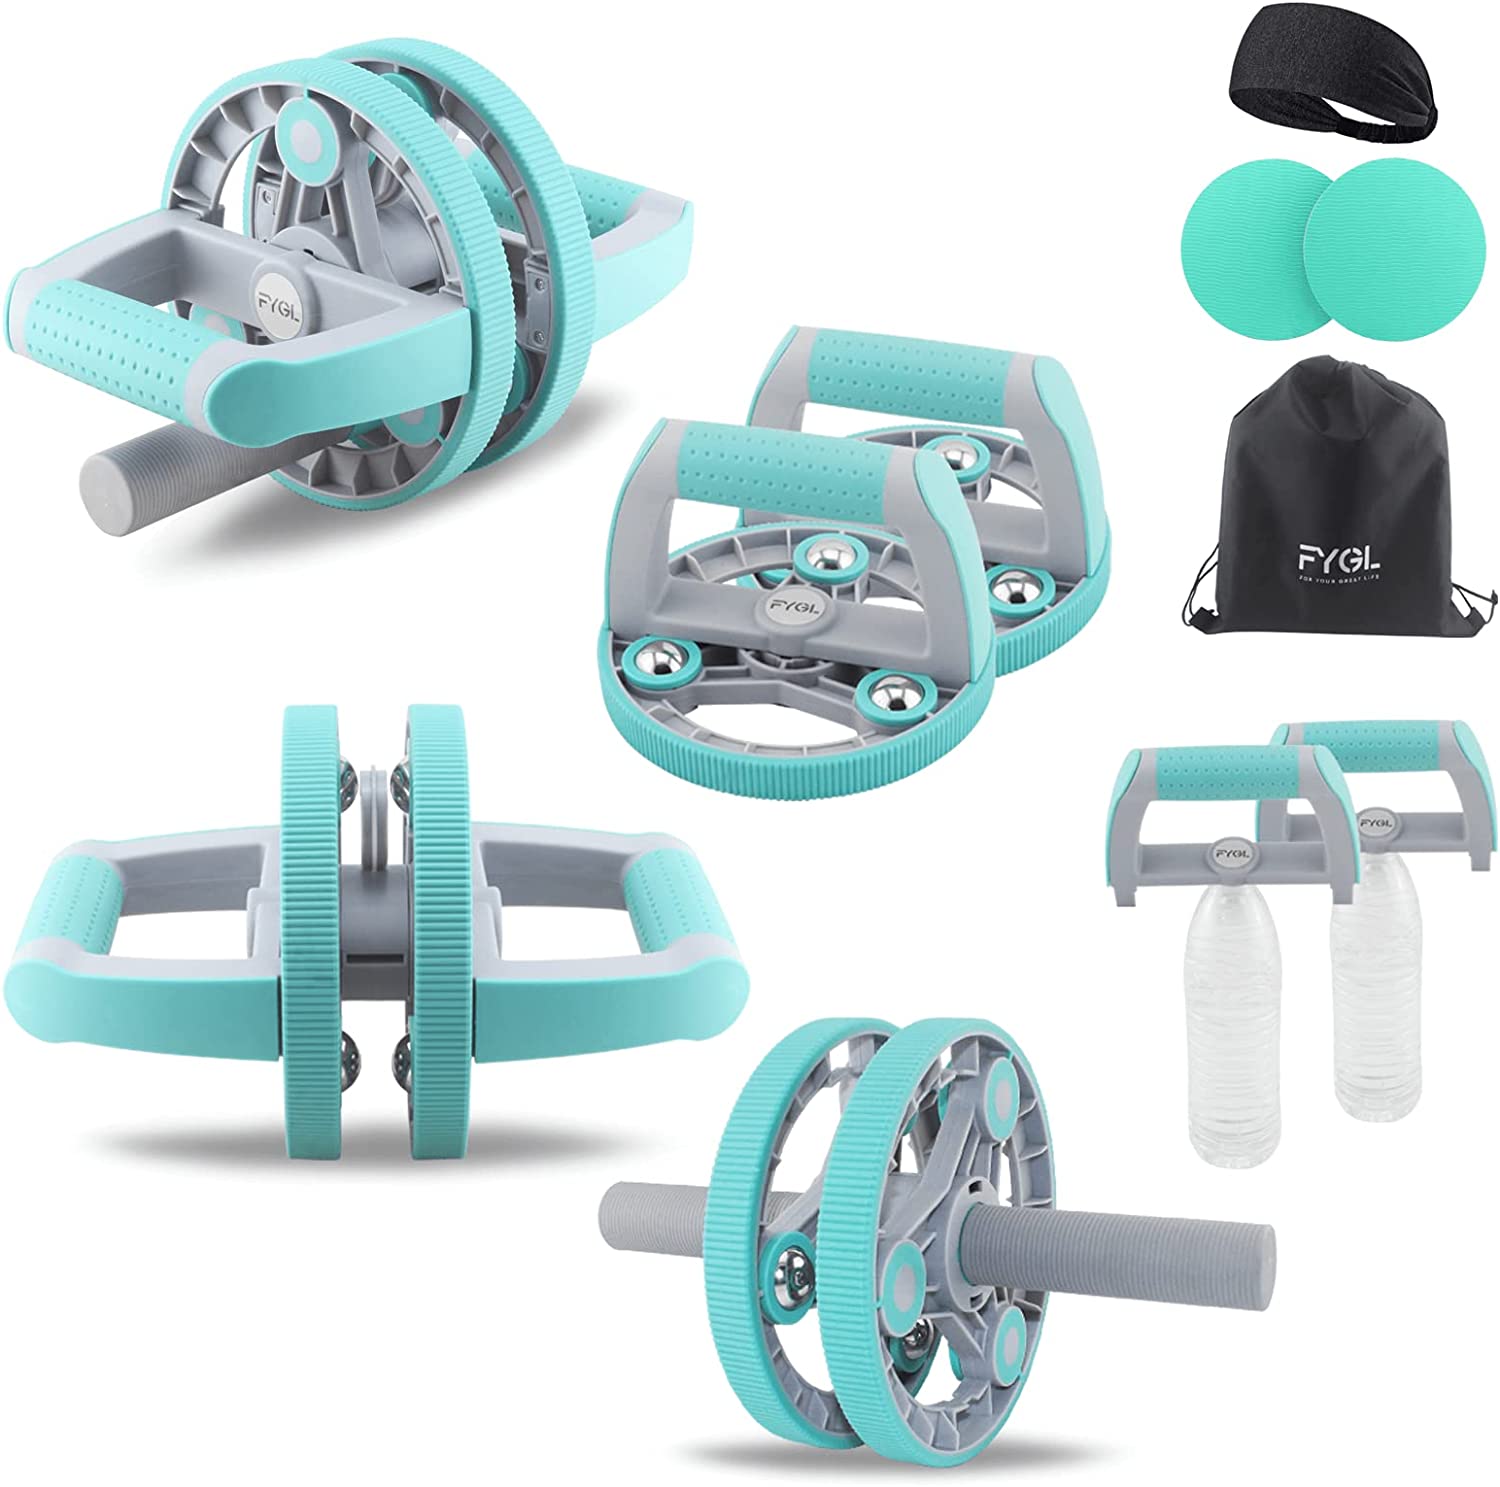 FYGL Portable Home Gym Equipment | 11 in 1 Multifunctional Workout Kit for Women | Ab Roller | Push Up Bars | Resistance Bands | Dumbbells | Kettlebell | Workout Equipment for Home Workouts